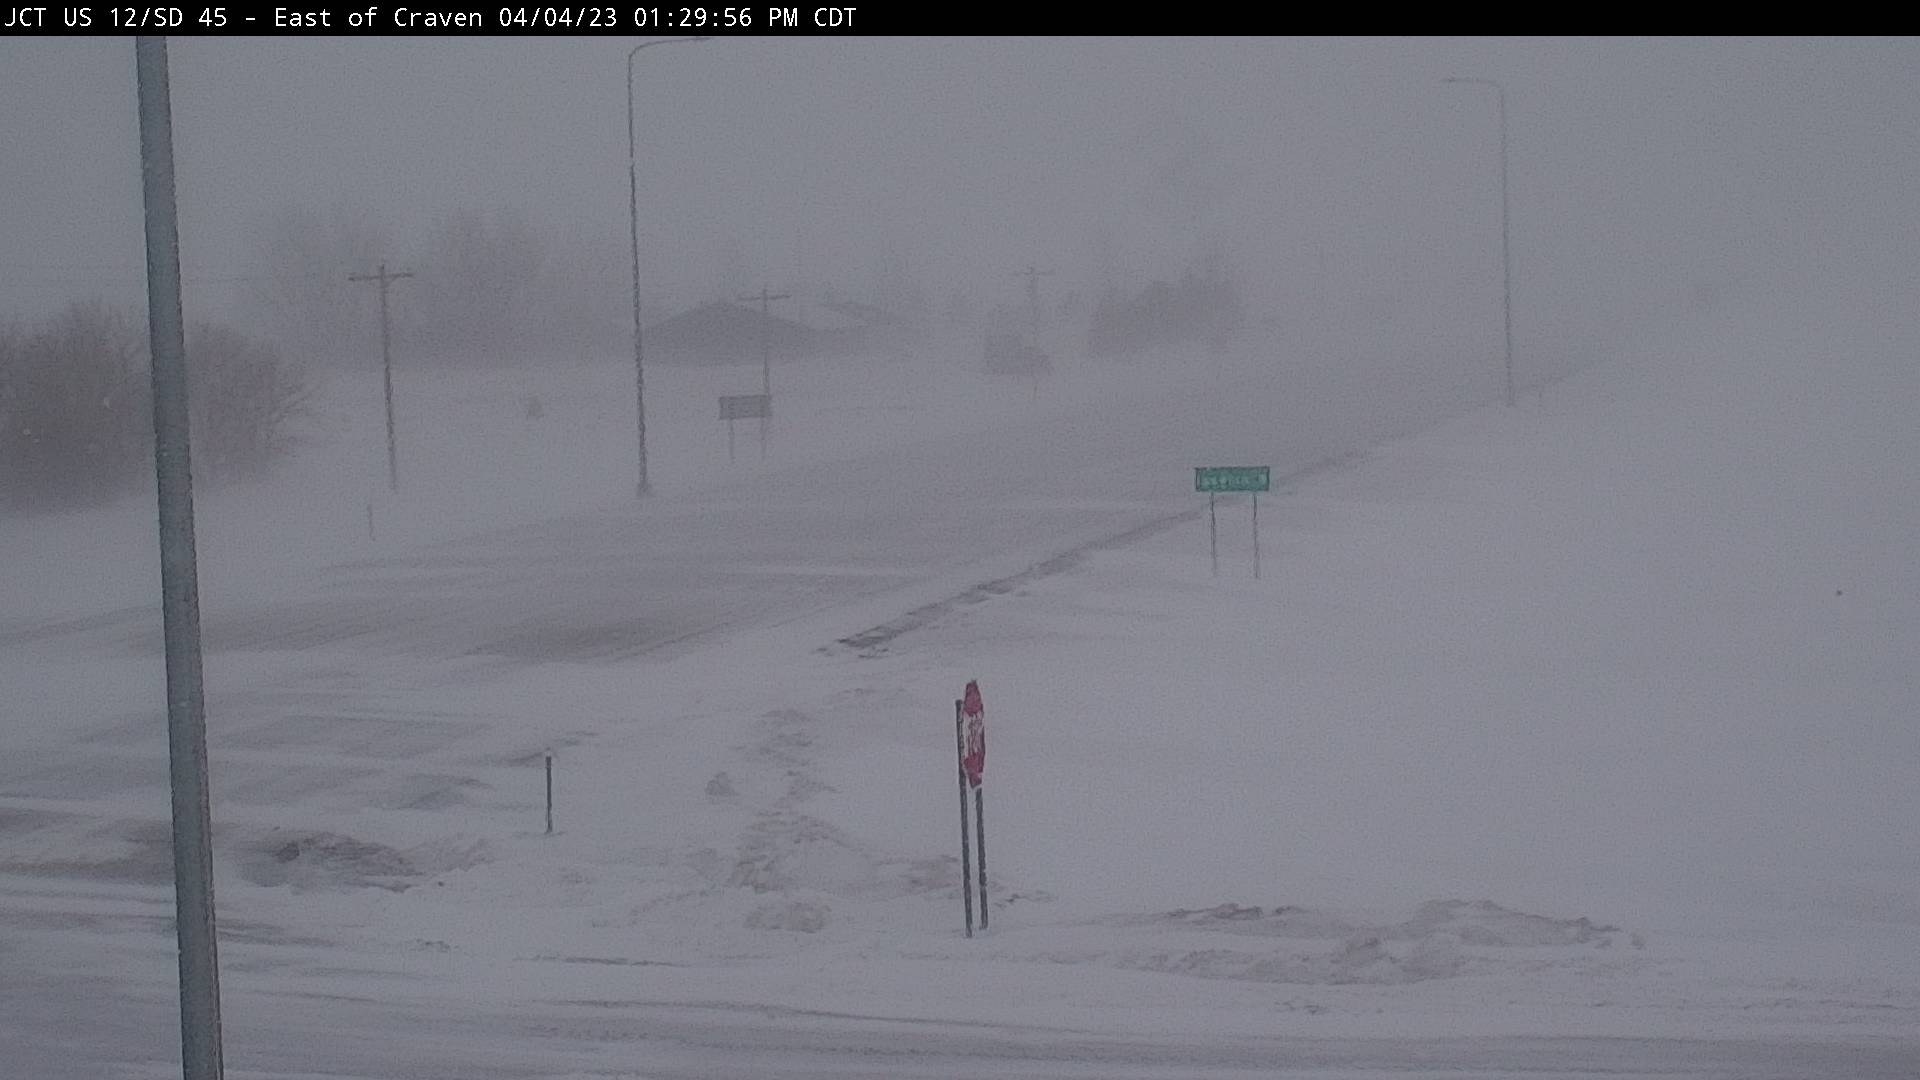 	View of US12 from Craven's Corner, near Ipswich, SD at 1:30 PM on April 4th. Visibility from falling snow was less than 1/2 mile.Â  (Image from SD DOT)